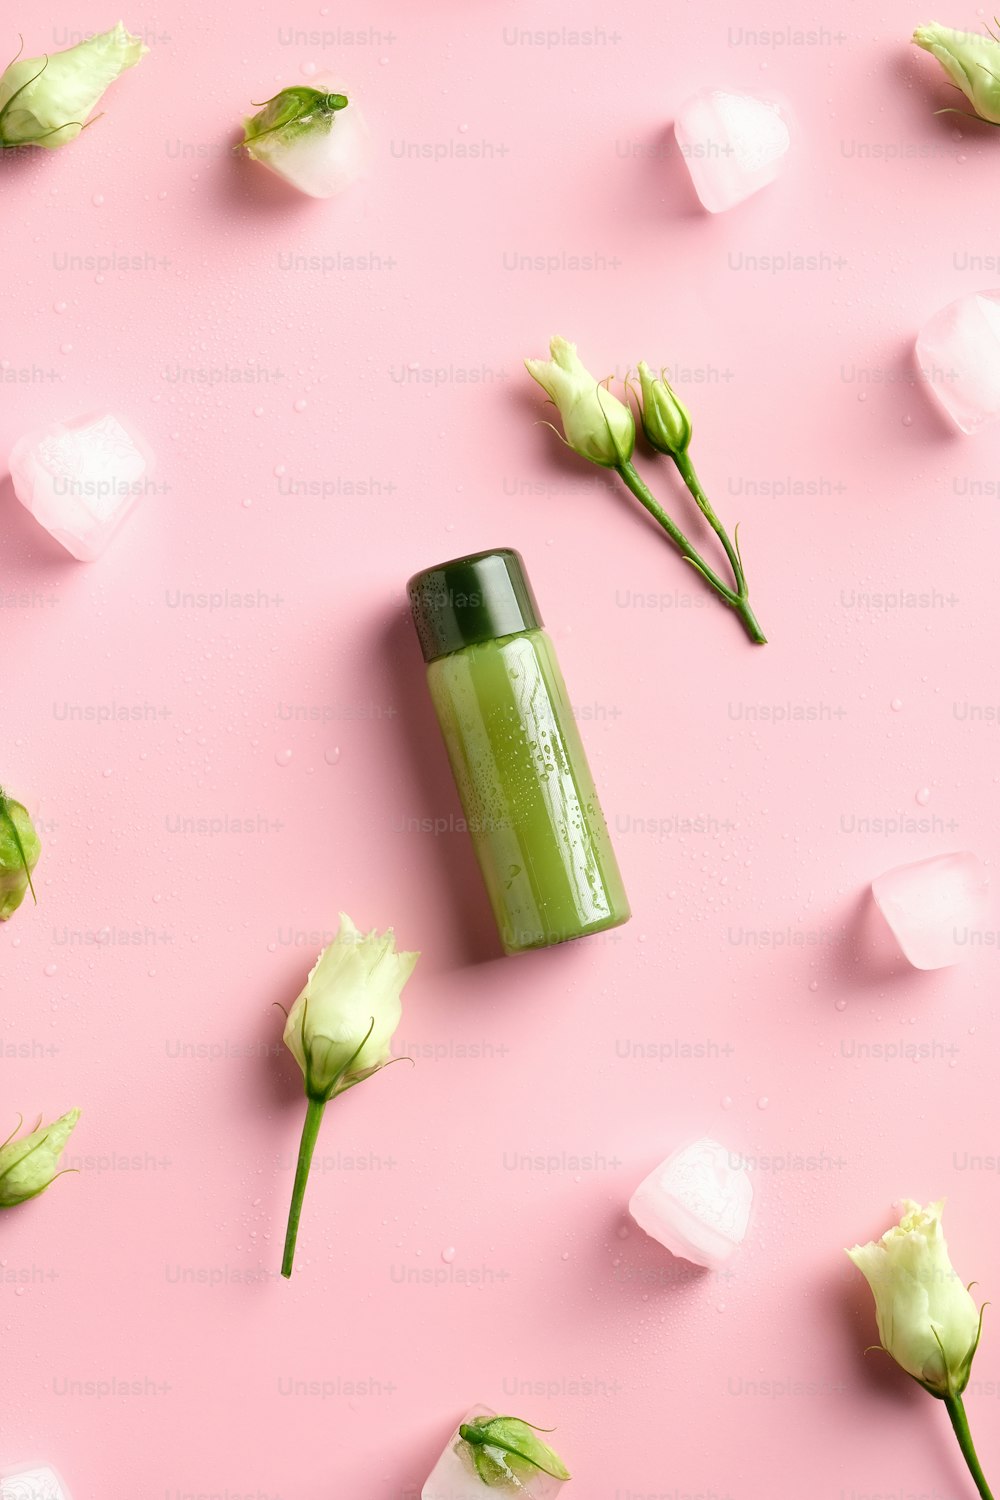 Shower gel green clear cosmetic bottle, ice cubes, spring flowers on pink background. Natural beauty product. Flat lay, top view.